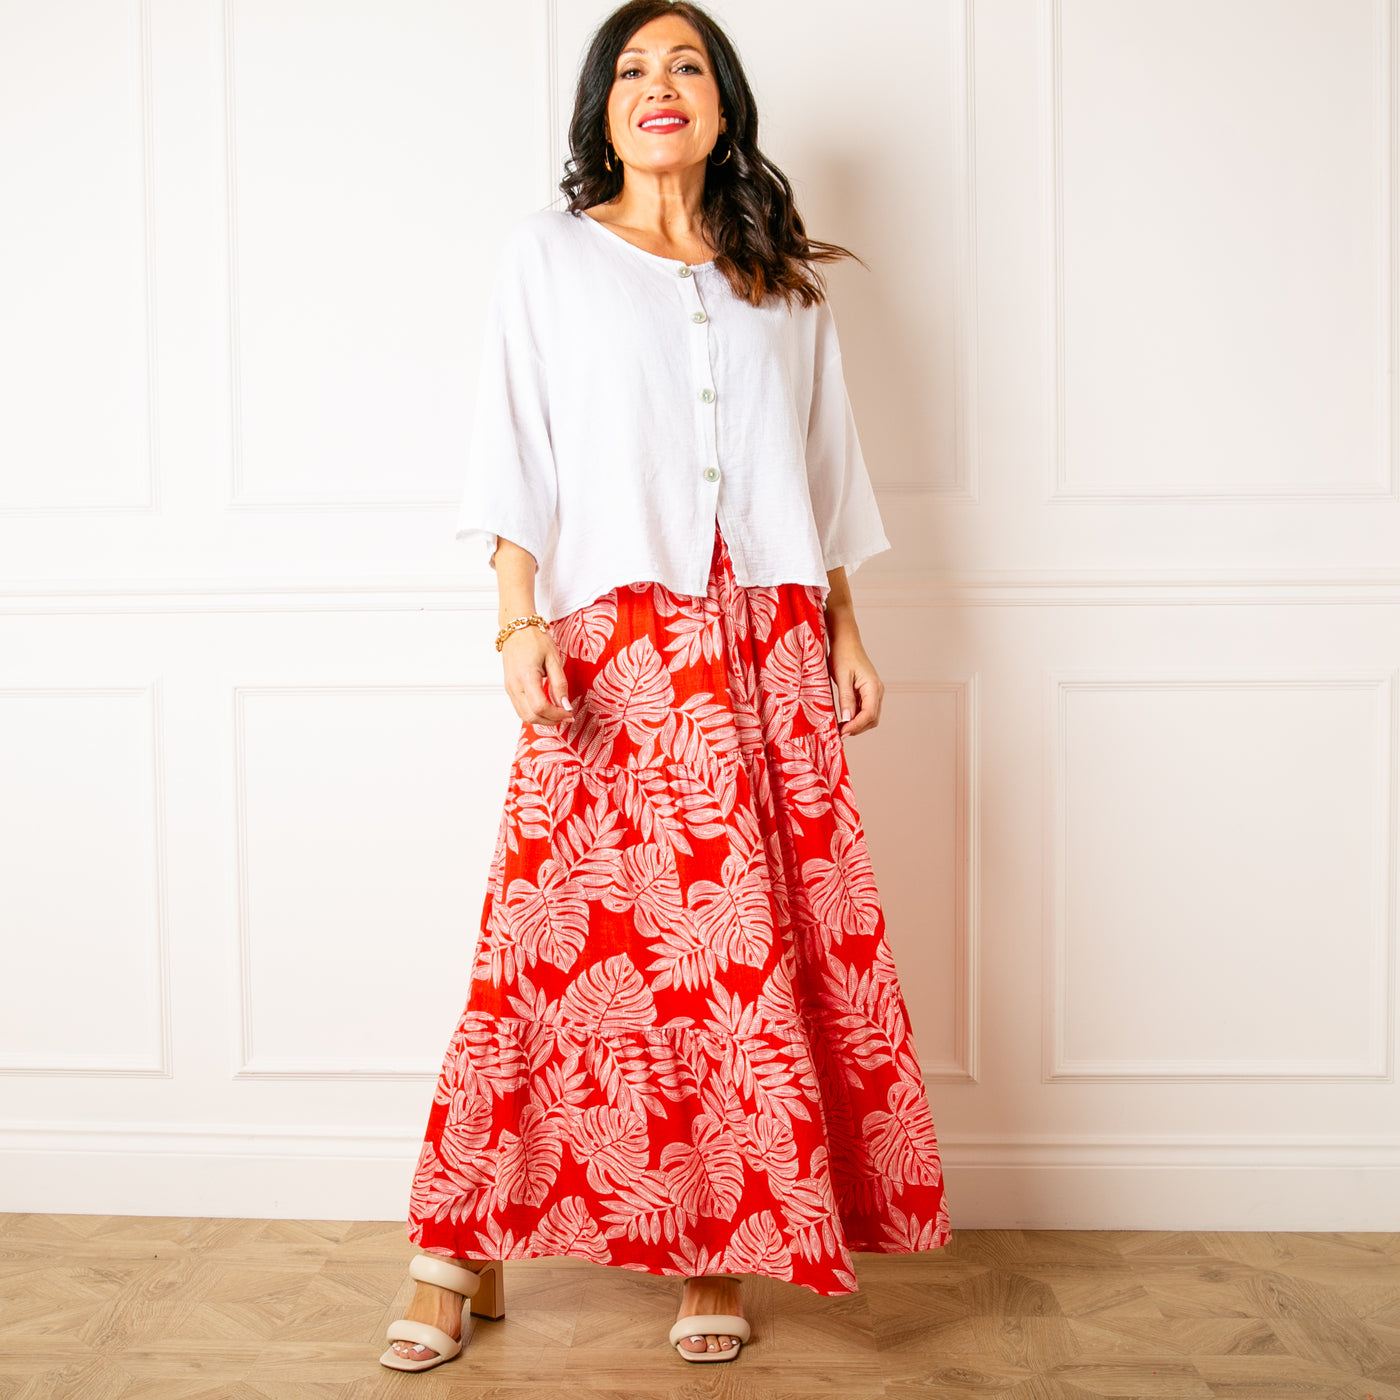 The red Linen Leaf Tiered Skirt featuring a beautiful tropical print in a viscose and linen blend material